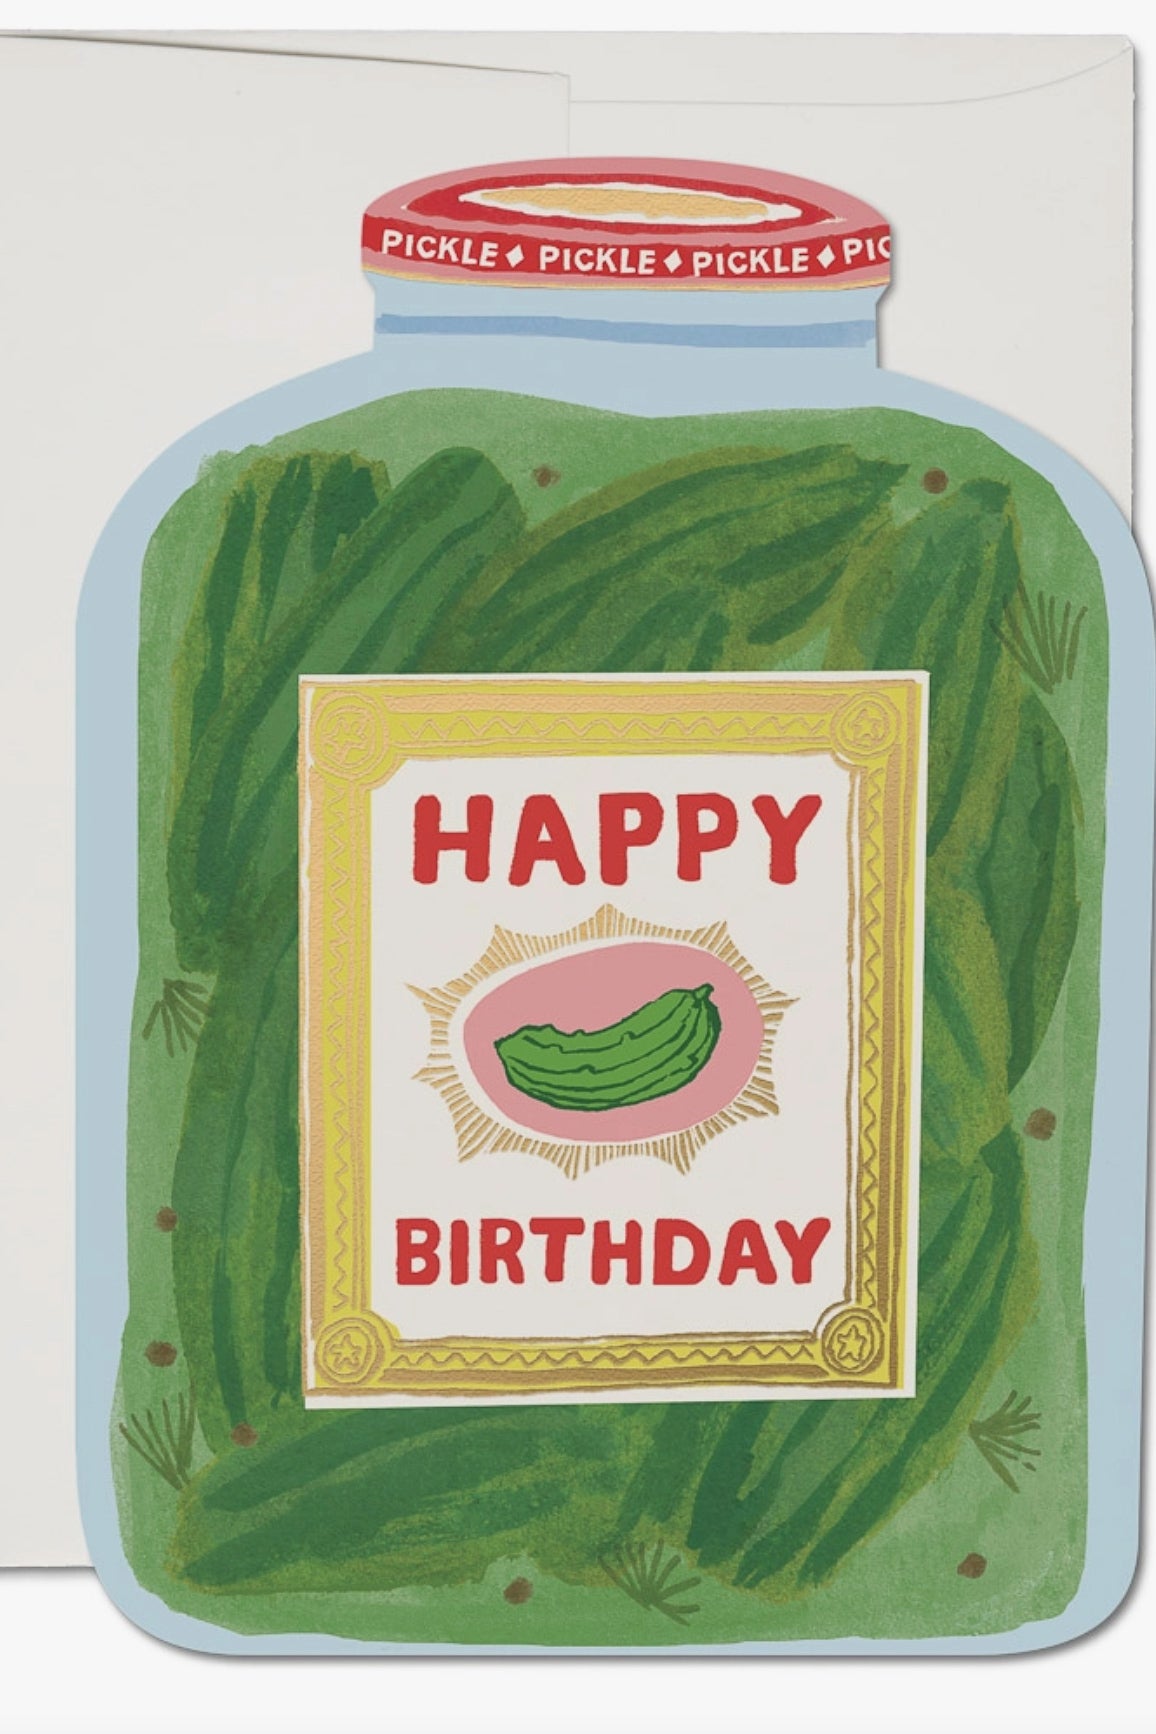 Red Cap Cards - Pickle Birthday Card